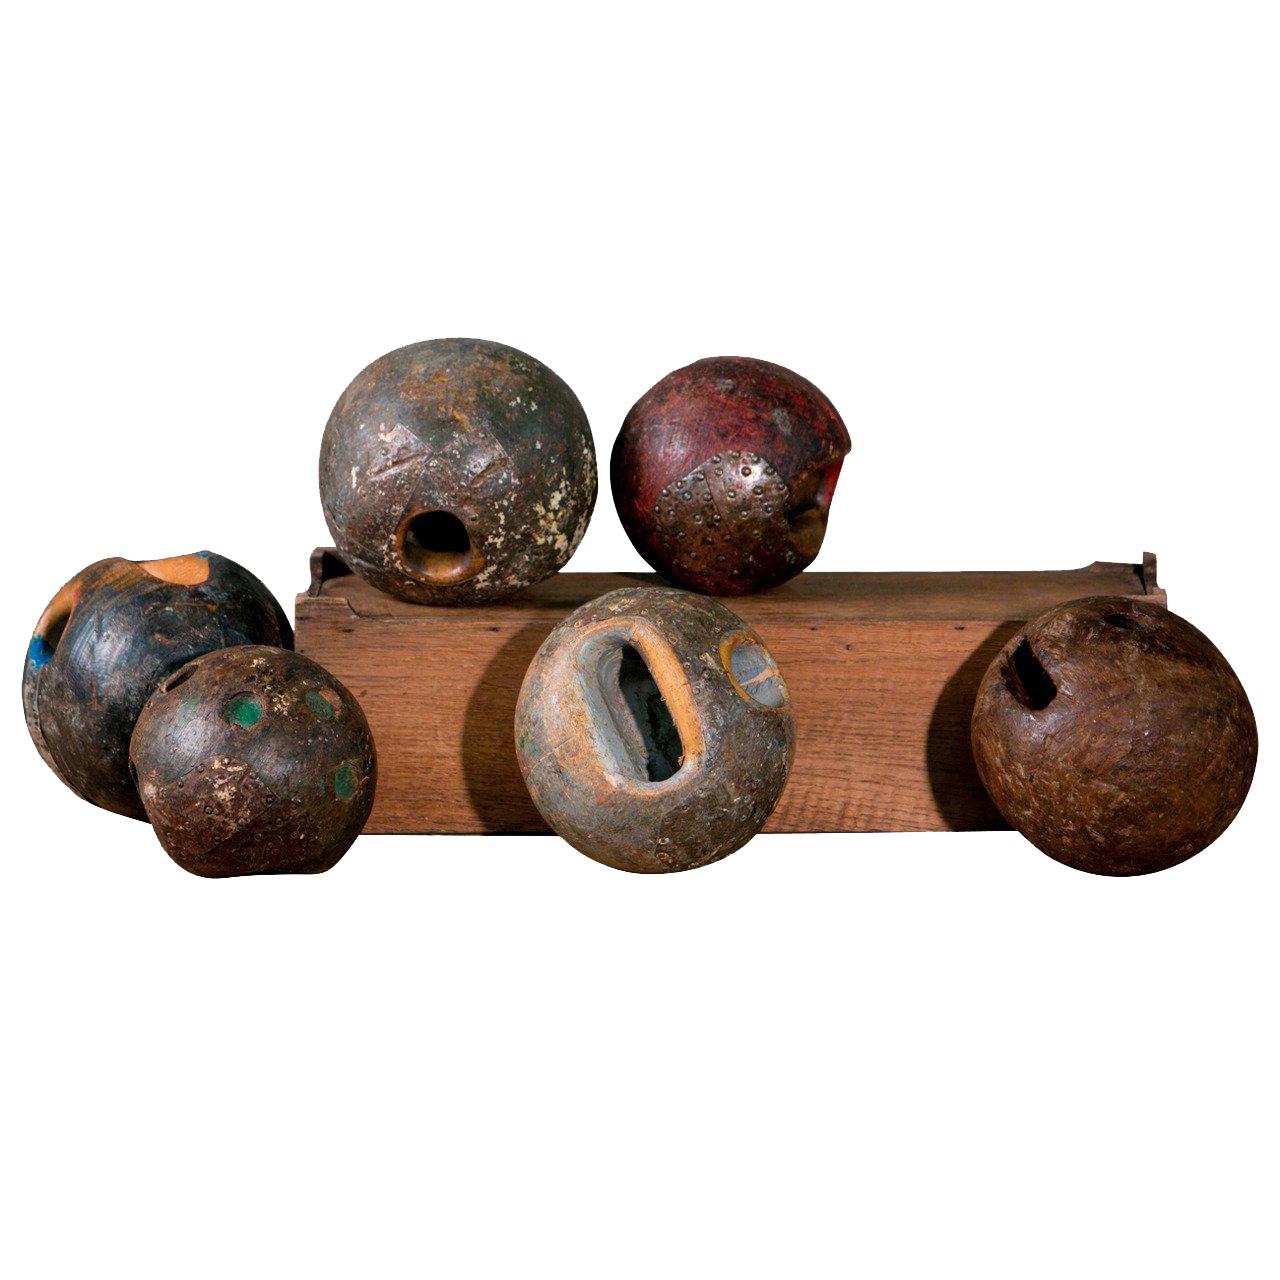 Assorted Antique European Game Balls of wood and metal. Highly decorative. 